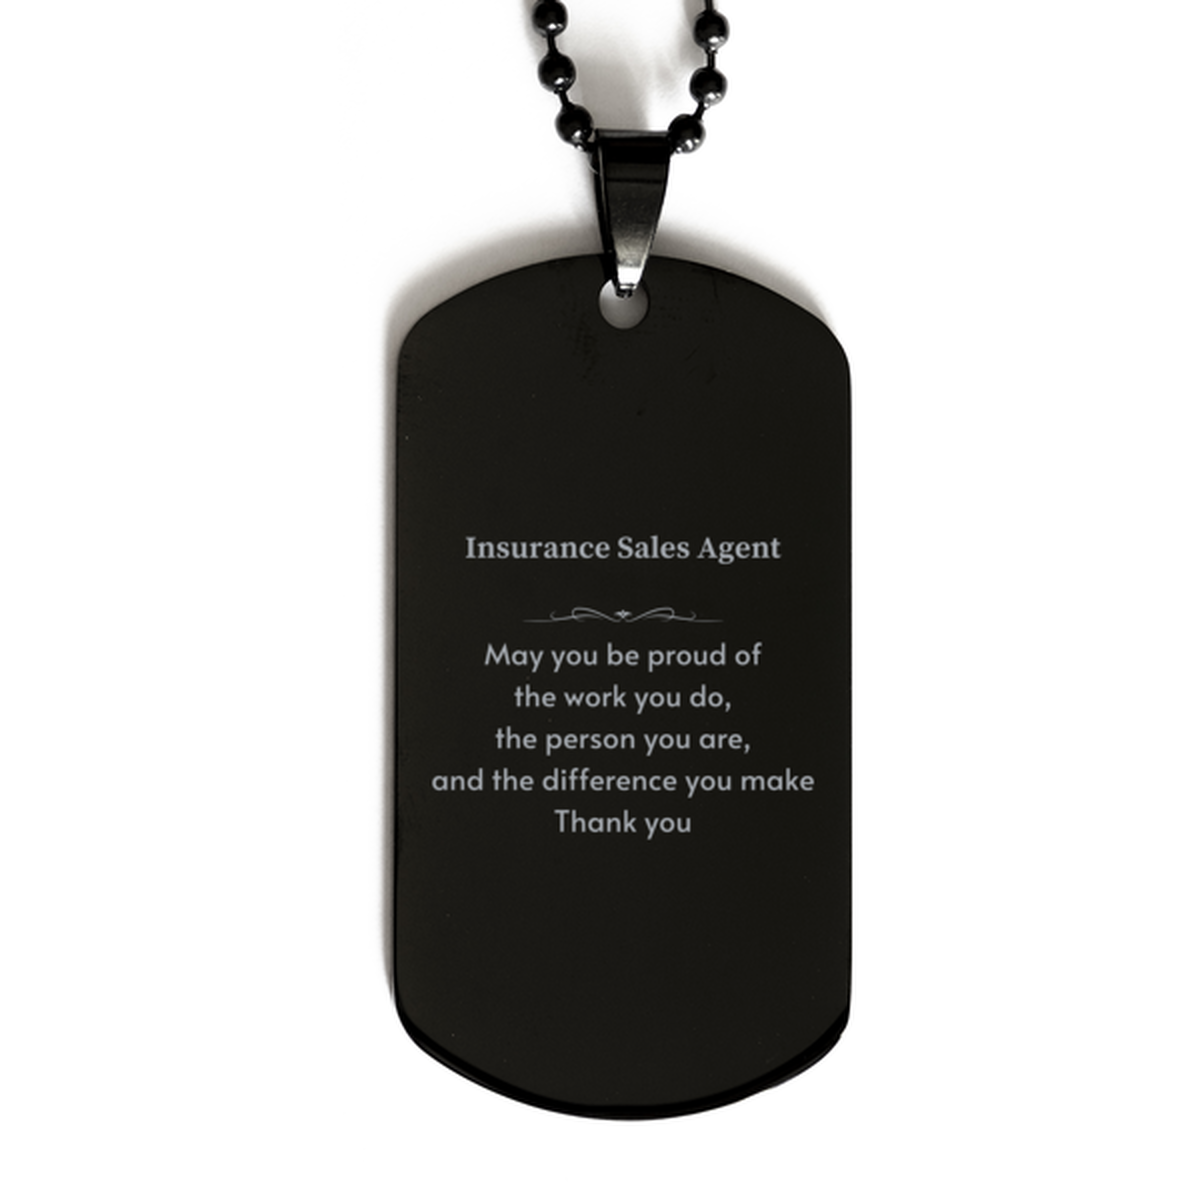 Heartwarming Black Dog Tag Retirement Coworkers Gifts for Insurance Sales Agent, Insurance Sales Agent May You be proud of the work you do, the person you are Gifts for Boss Men Women Friends